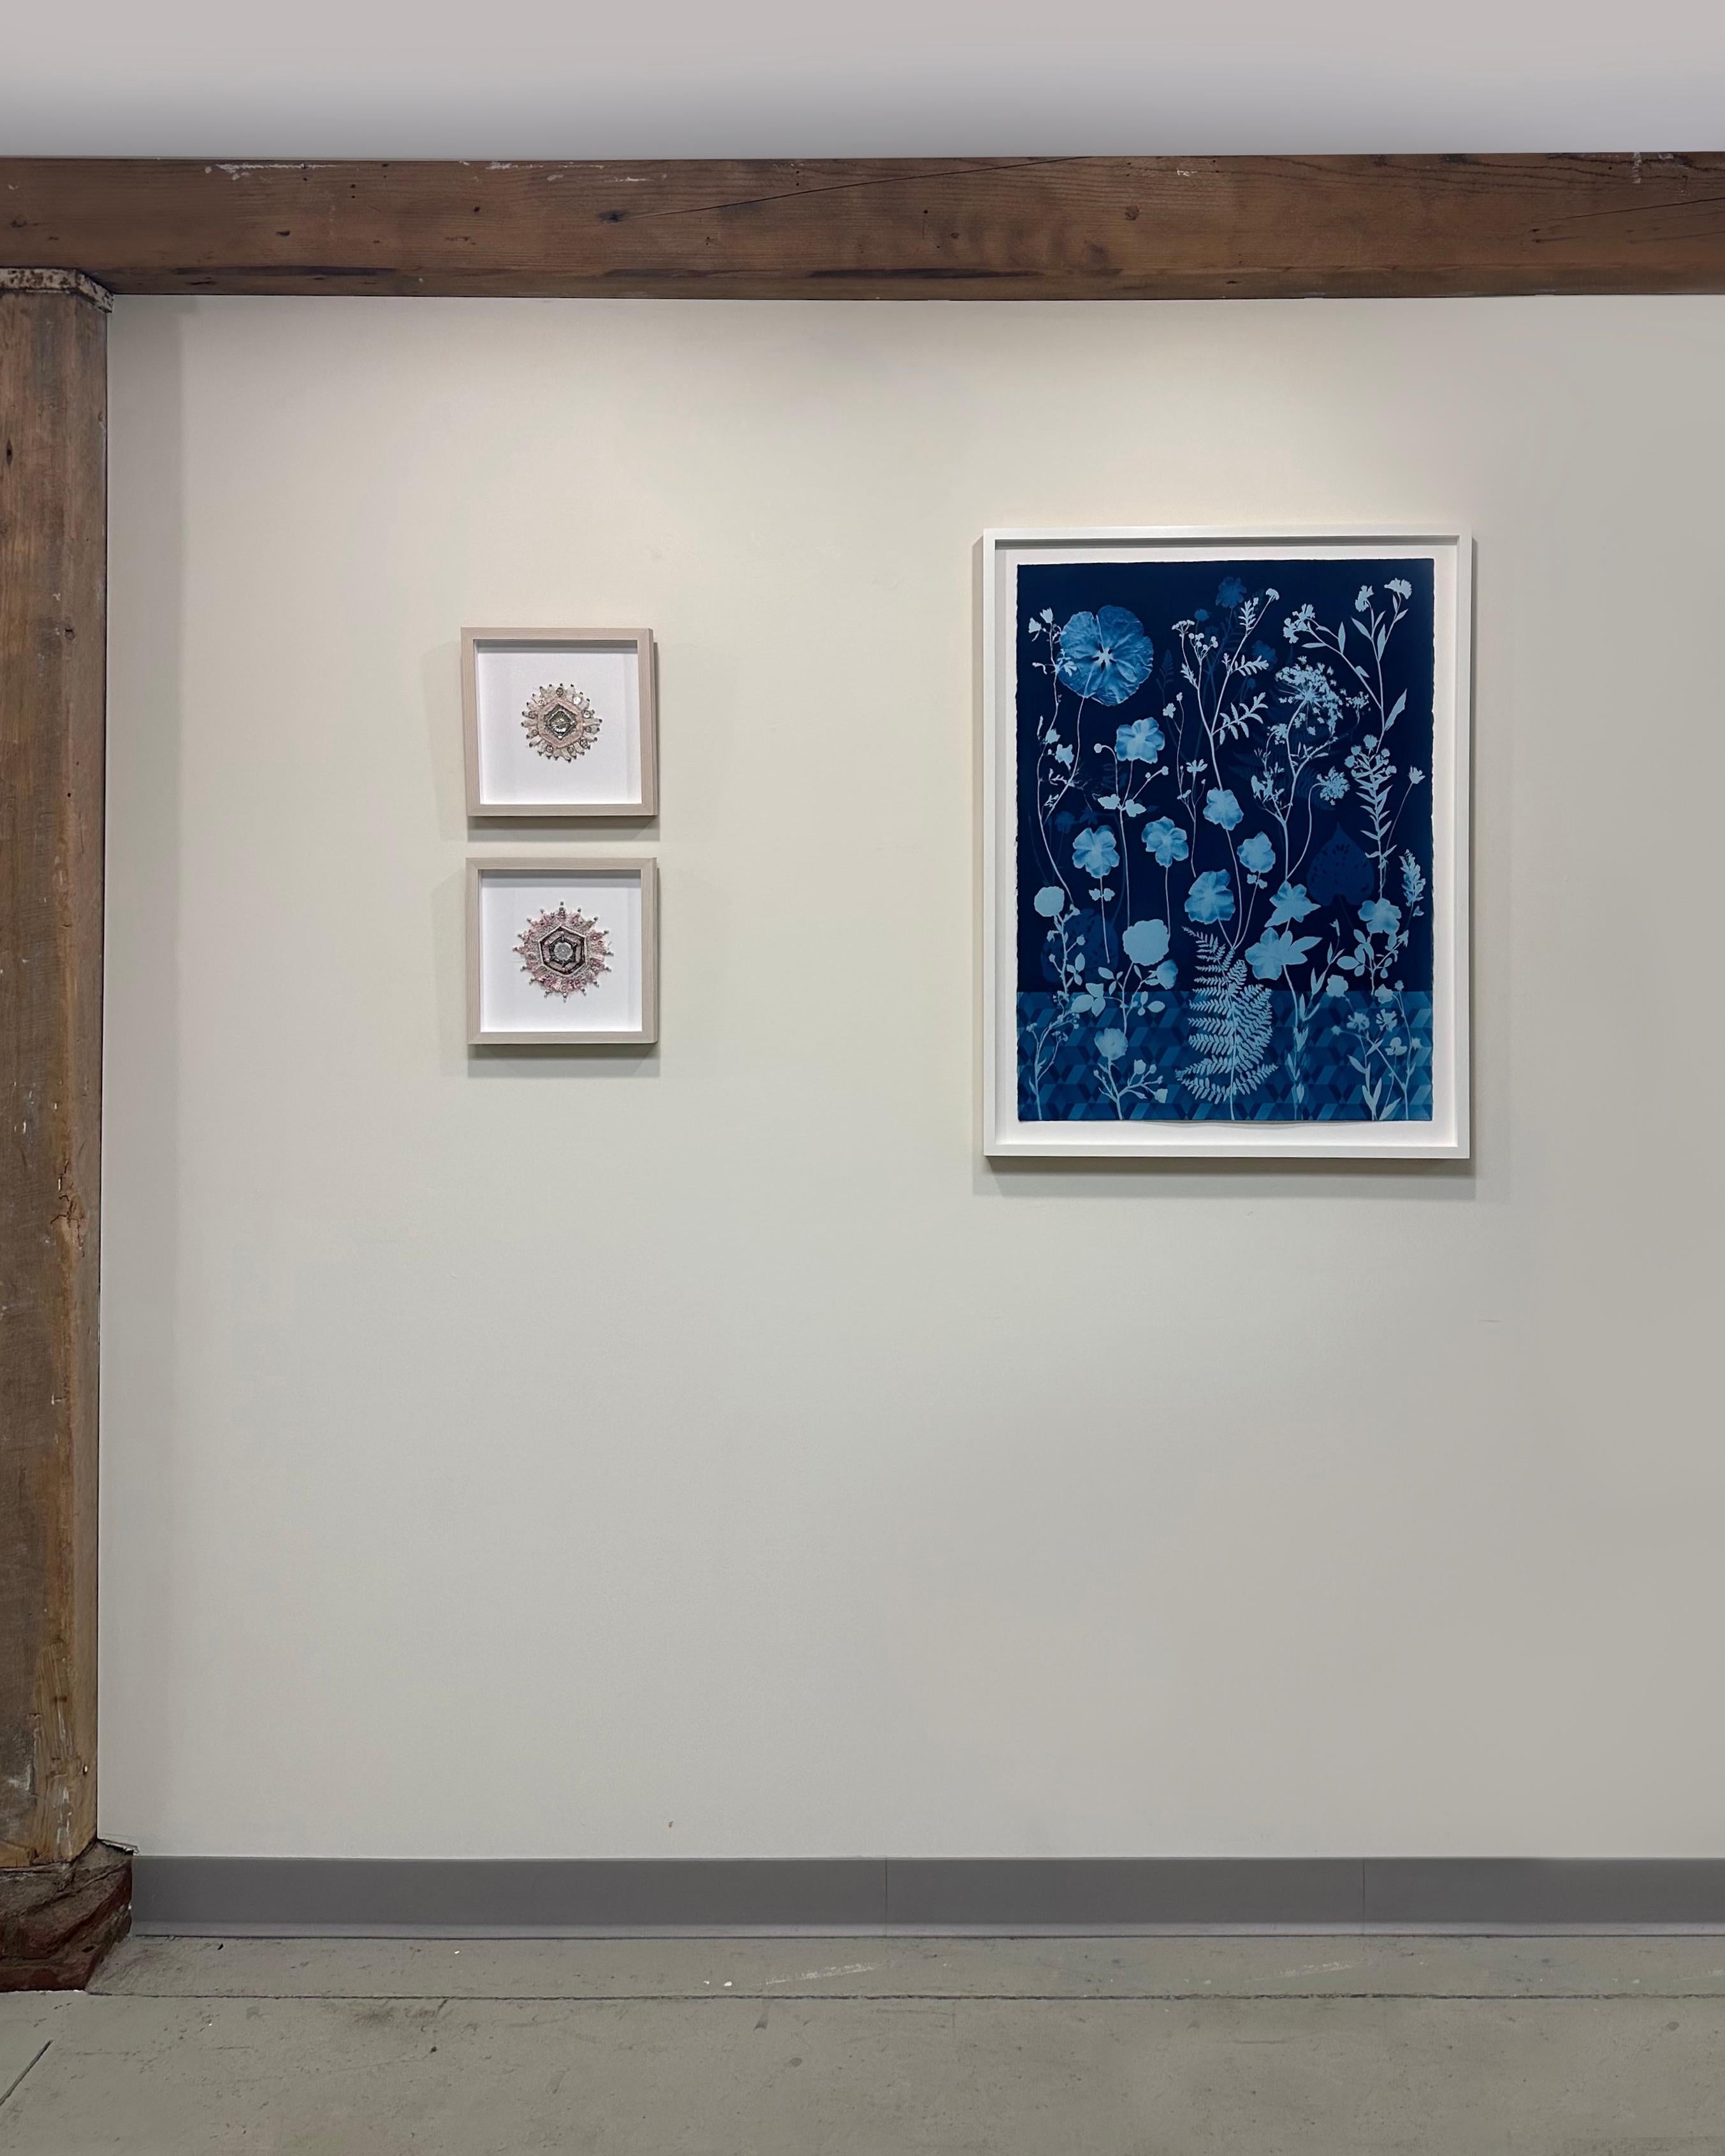 In watercolor, ink, gouache, and cyanotype on Arches platine paper, meticulously detailed flowers, including anemones, rose of sharon, and queen anne's lace are depicted in shades of pale blue against a deep, indigo blue background with a geometric